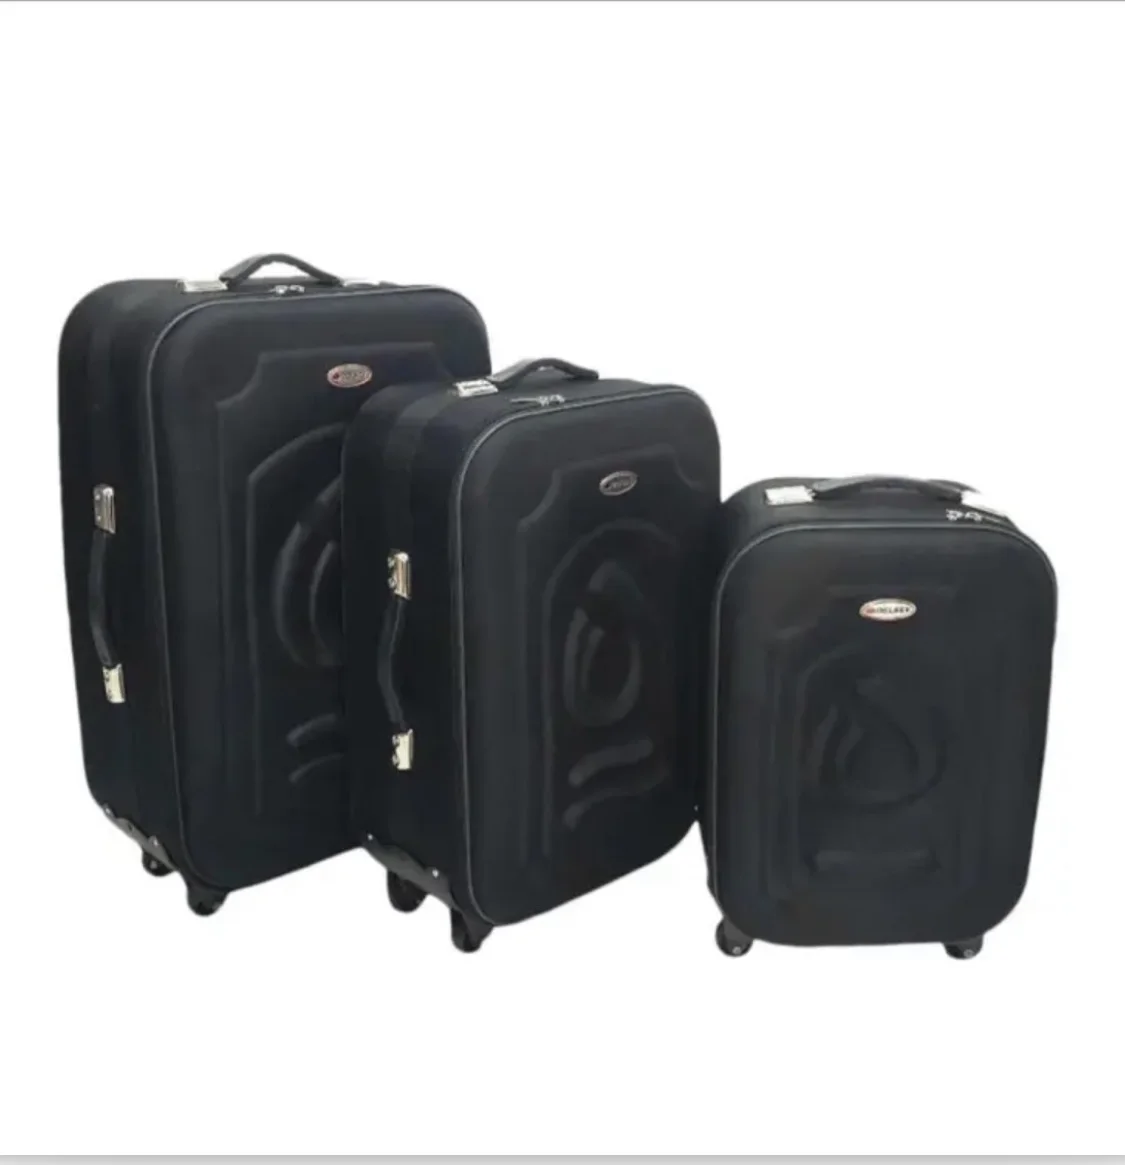 Wholesale 3pcs 16/20/ 24 inch Hot Sell 360 degree travel suitcase